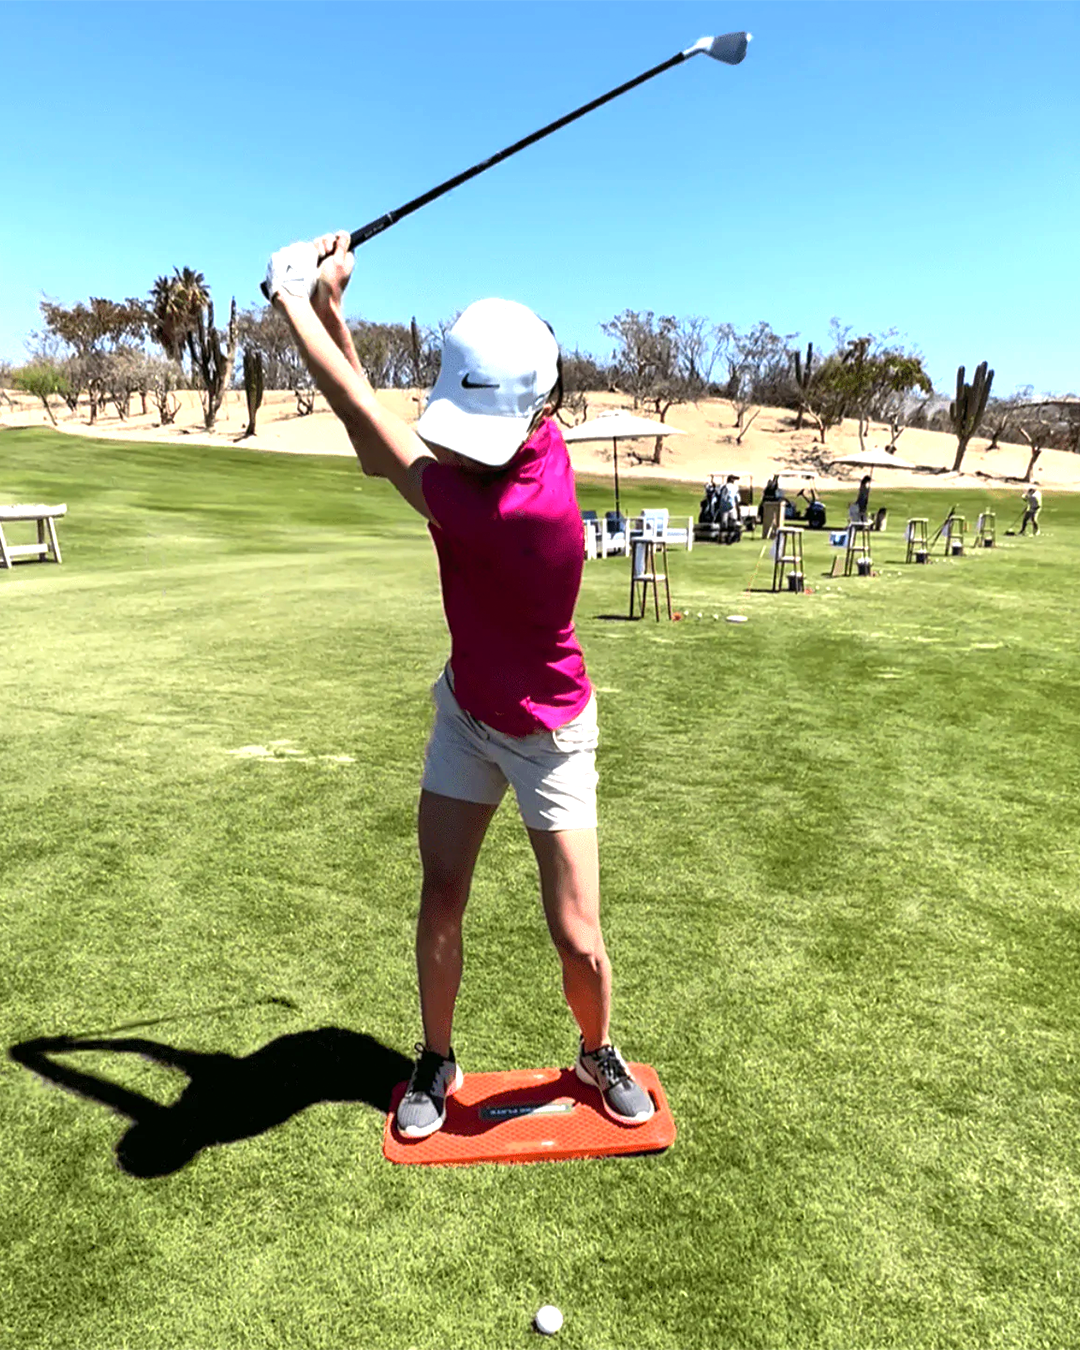 Try the Pressure Plate on the range to dial in your swing. (Photo courtesy of WhyGolf.com.)